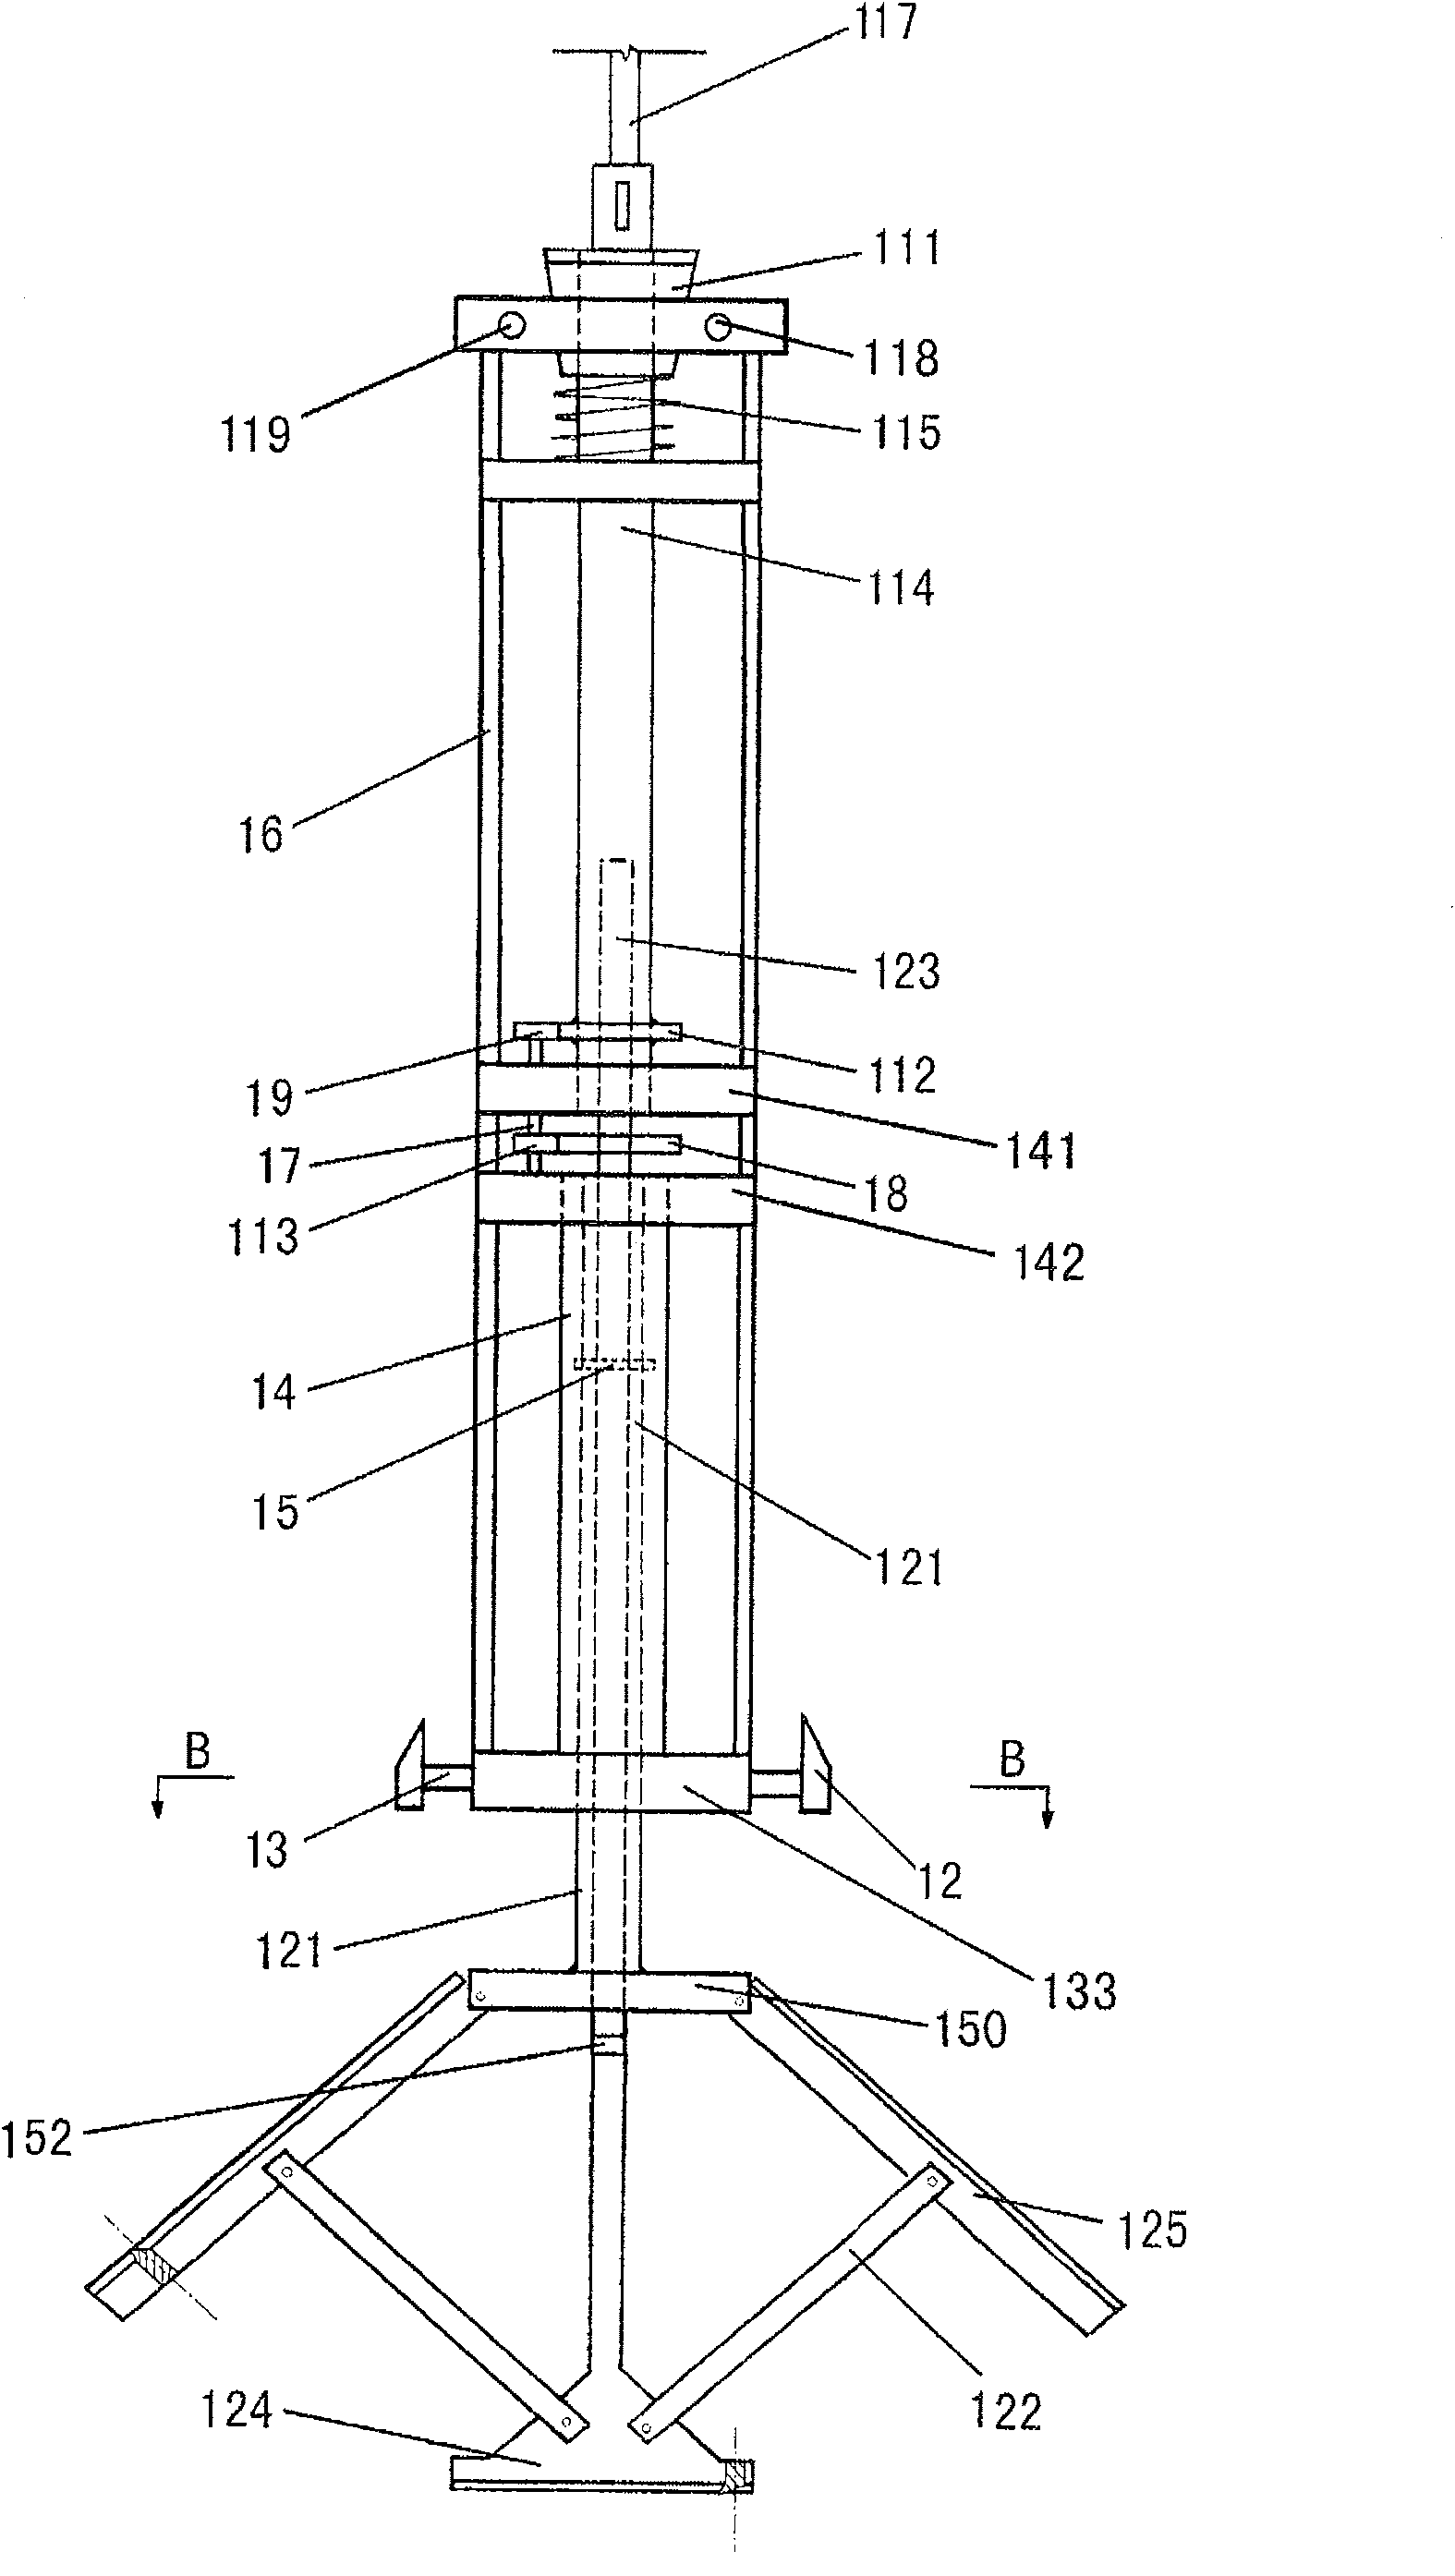 Bottom expanding and pile-forming method for pipe sinking prefabricated steel concrete pedestal pile